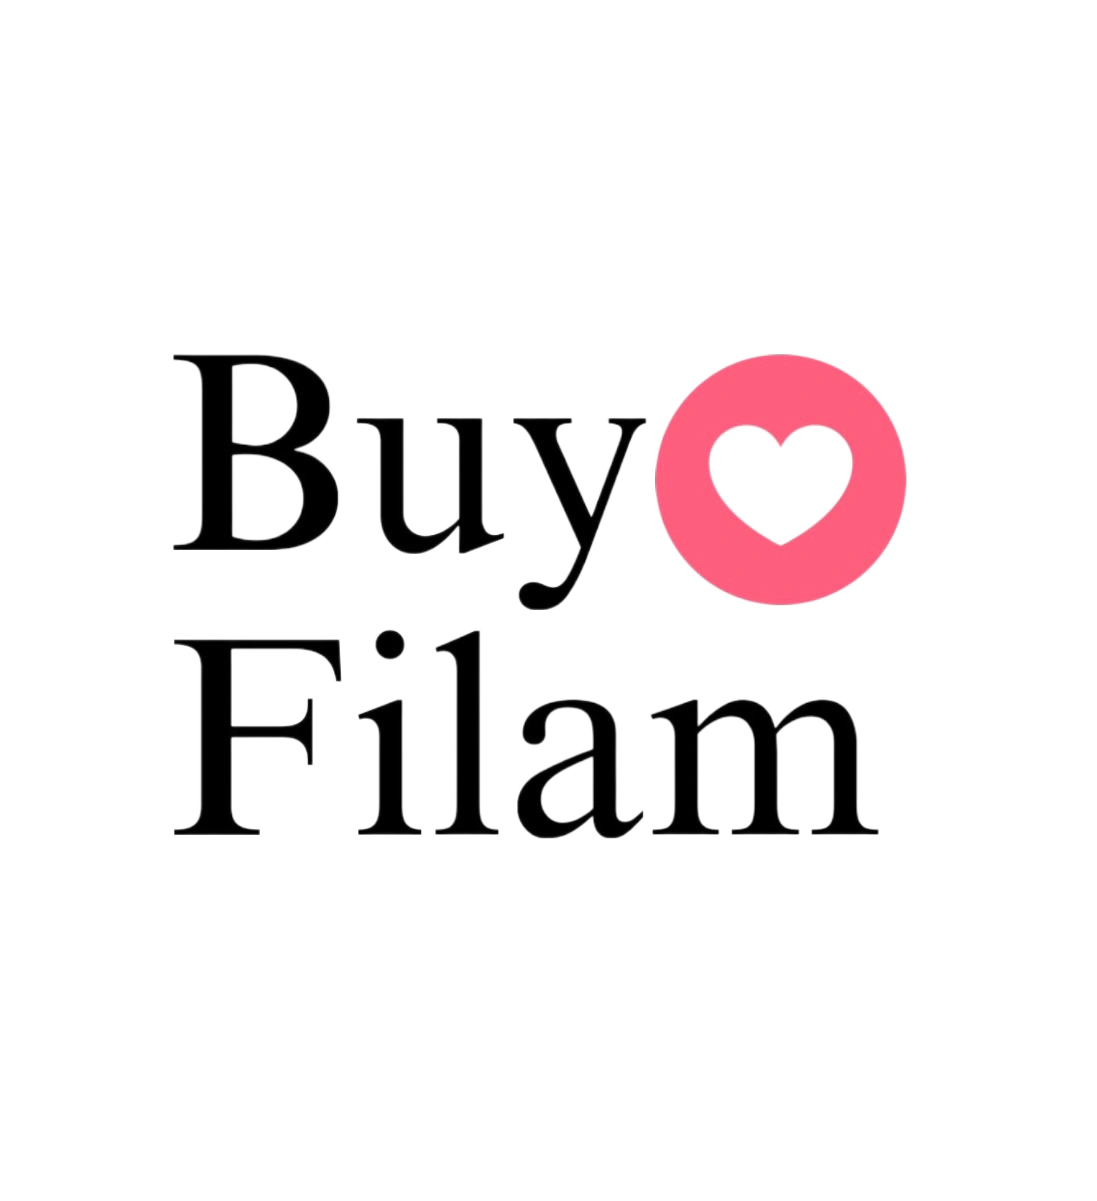 Buy Filam | Elevating Trusted FilAm Business of San Diego.